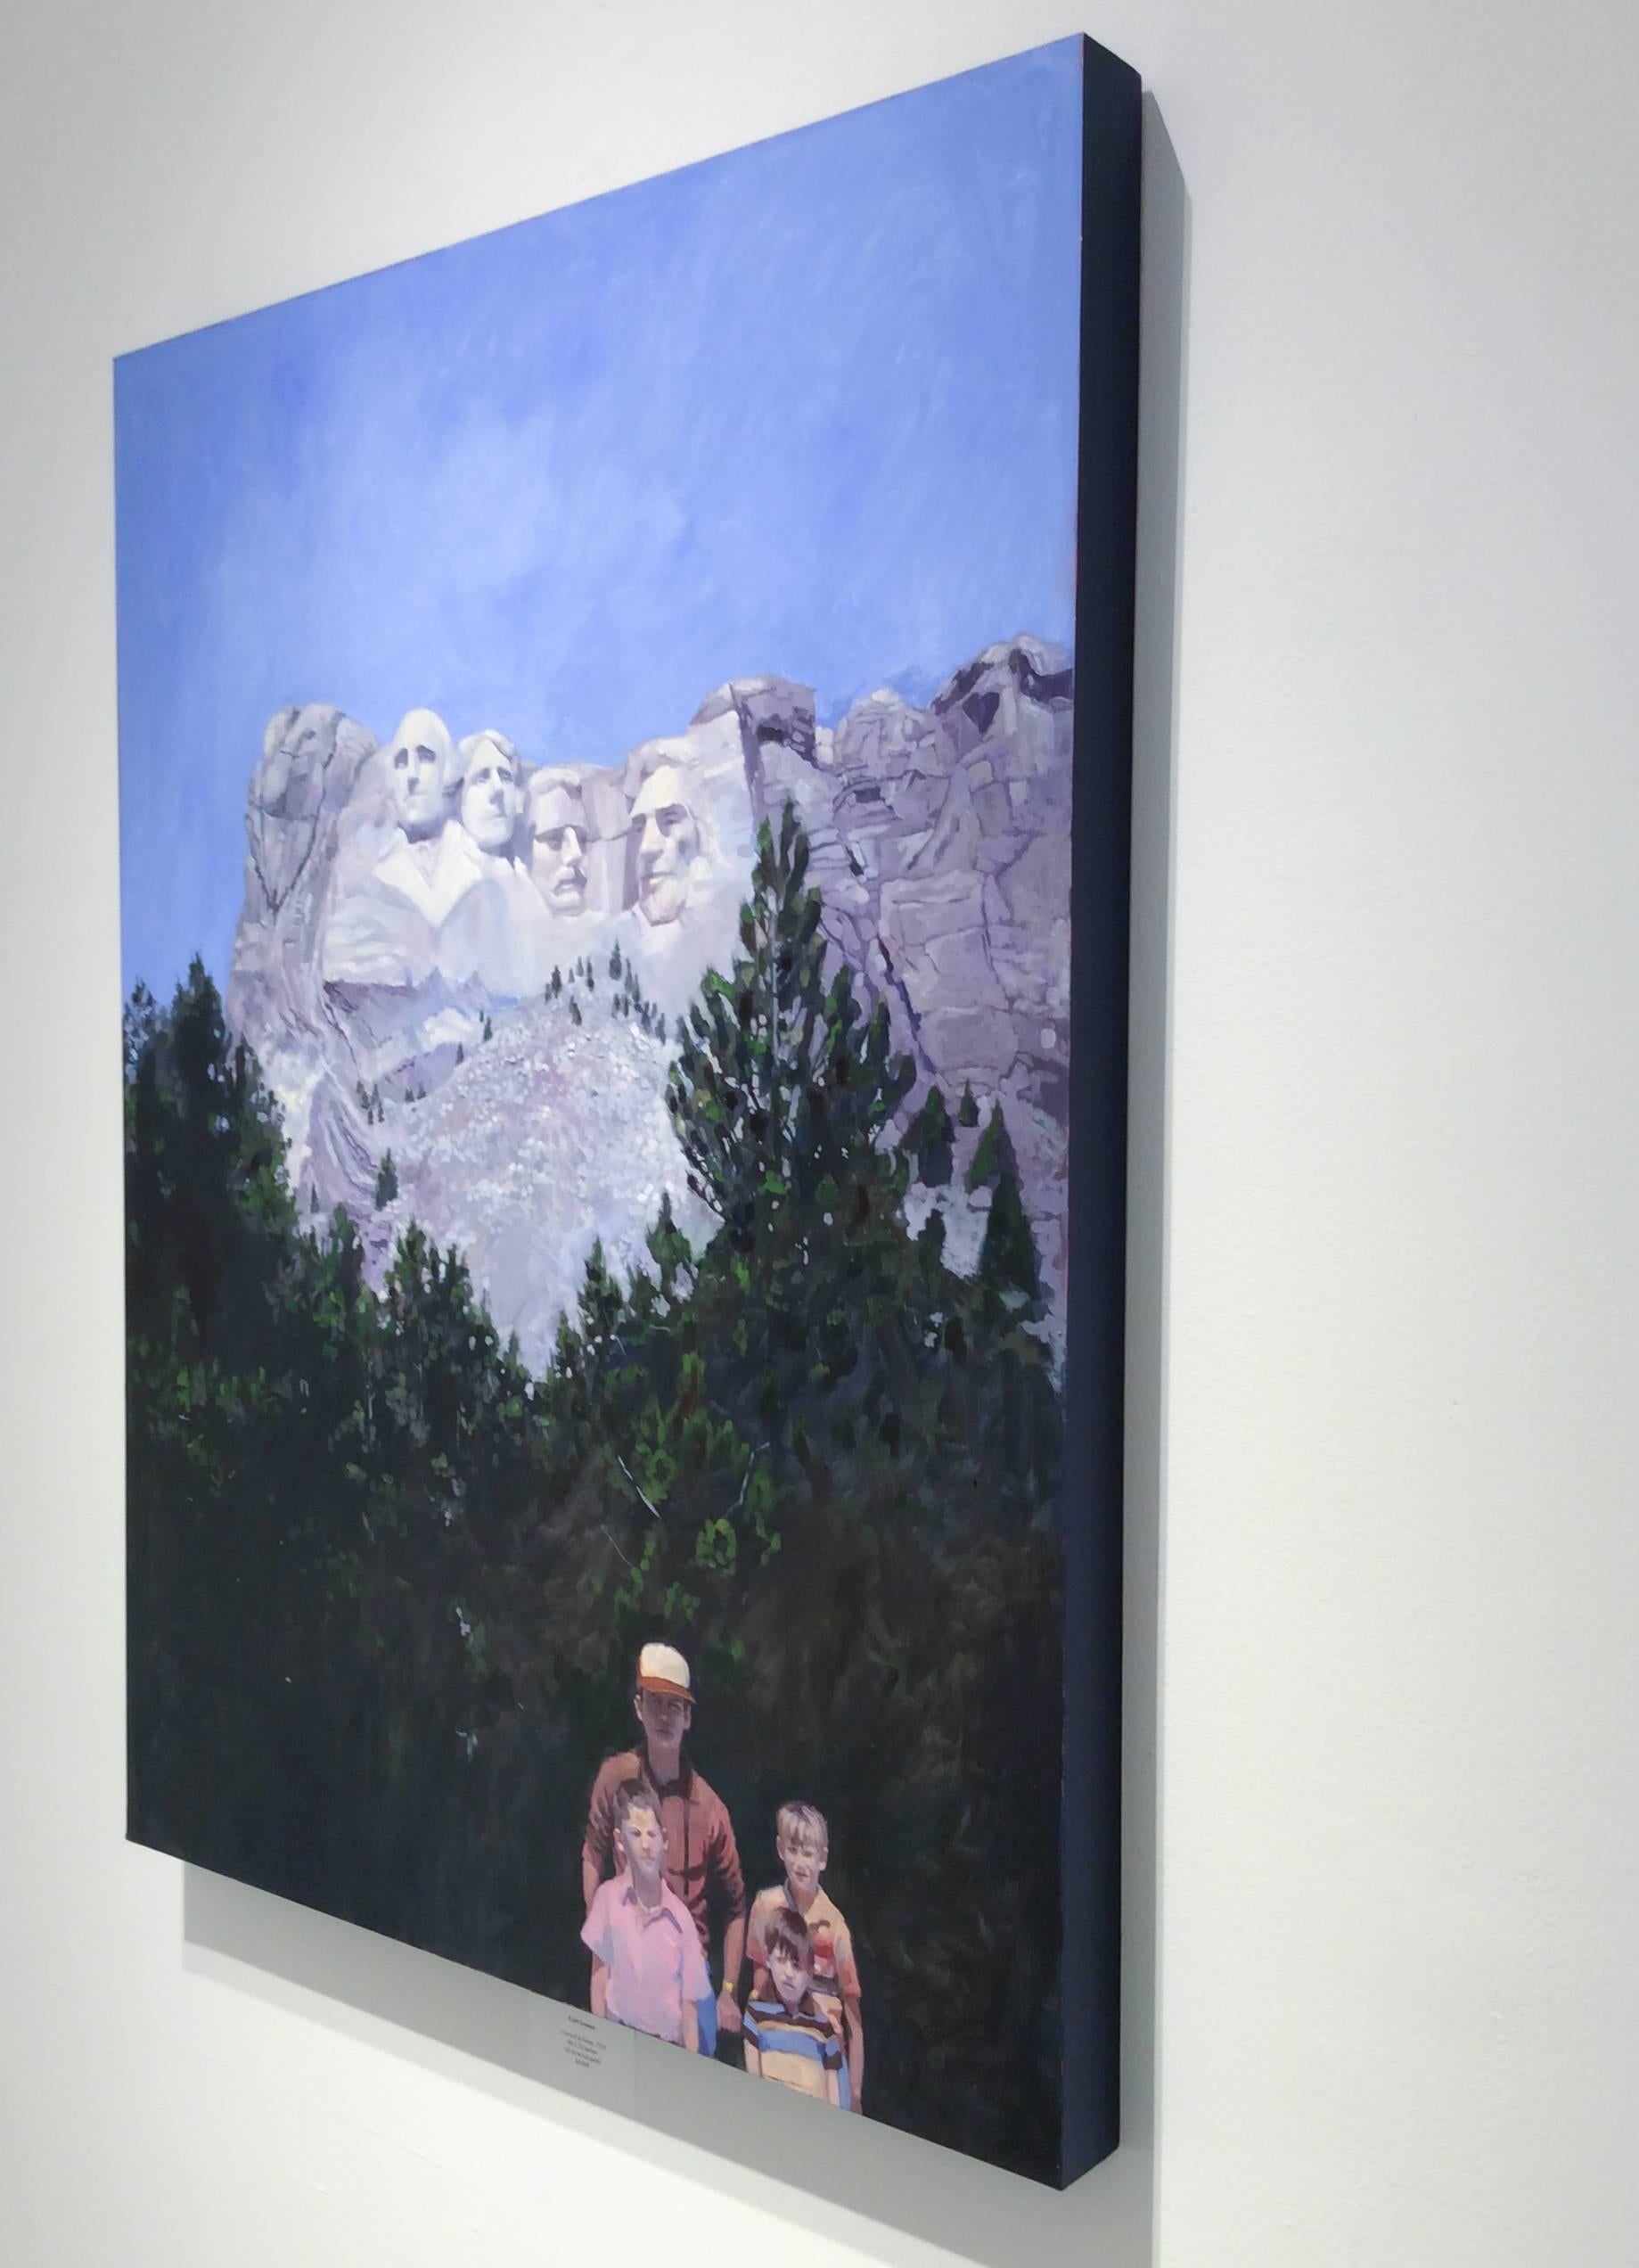 Carved in Stone (Modern Figurative Oil Painting of Family at Mount Rushmore) - Black Figurative Painting by Carl Grauer